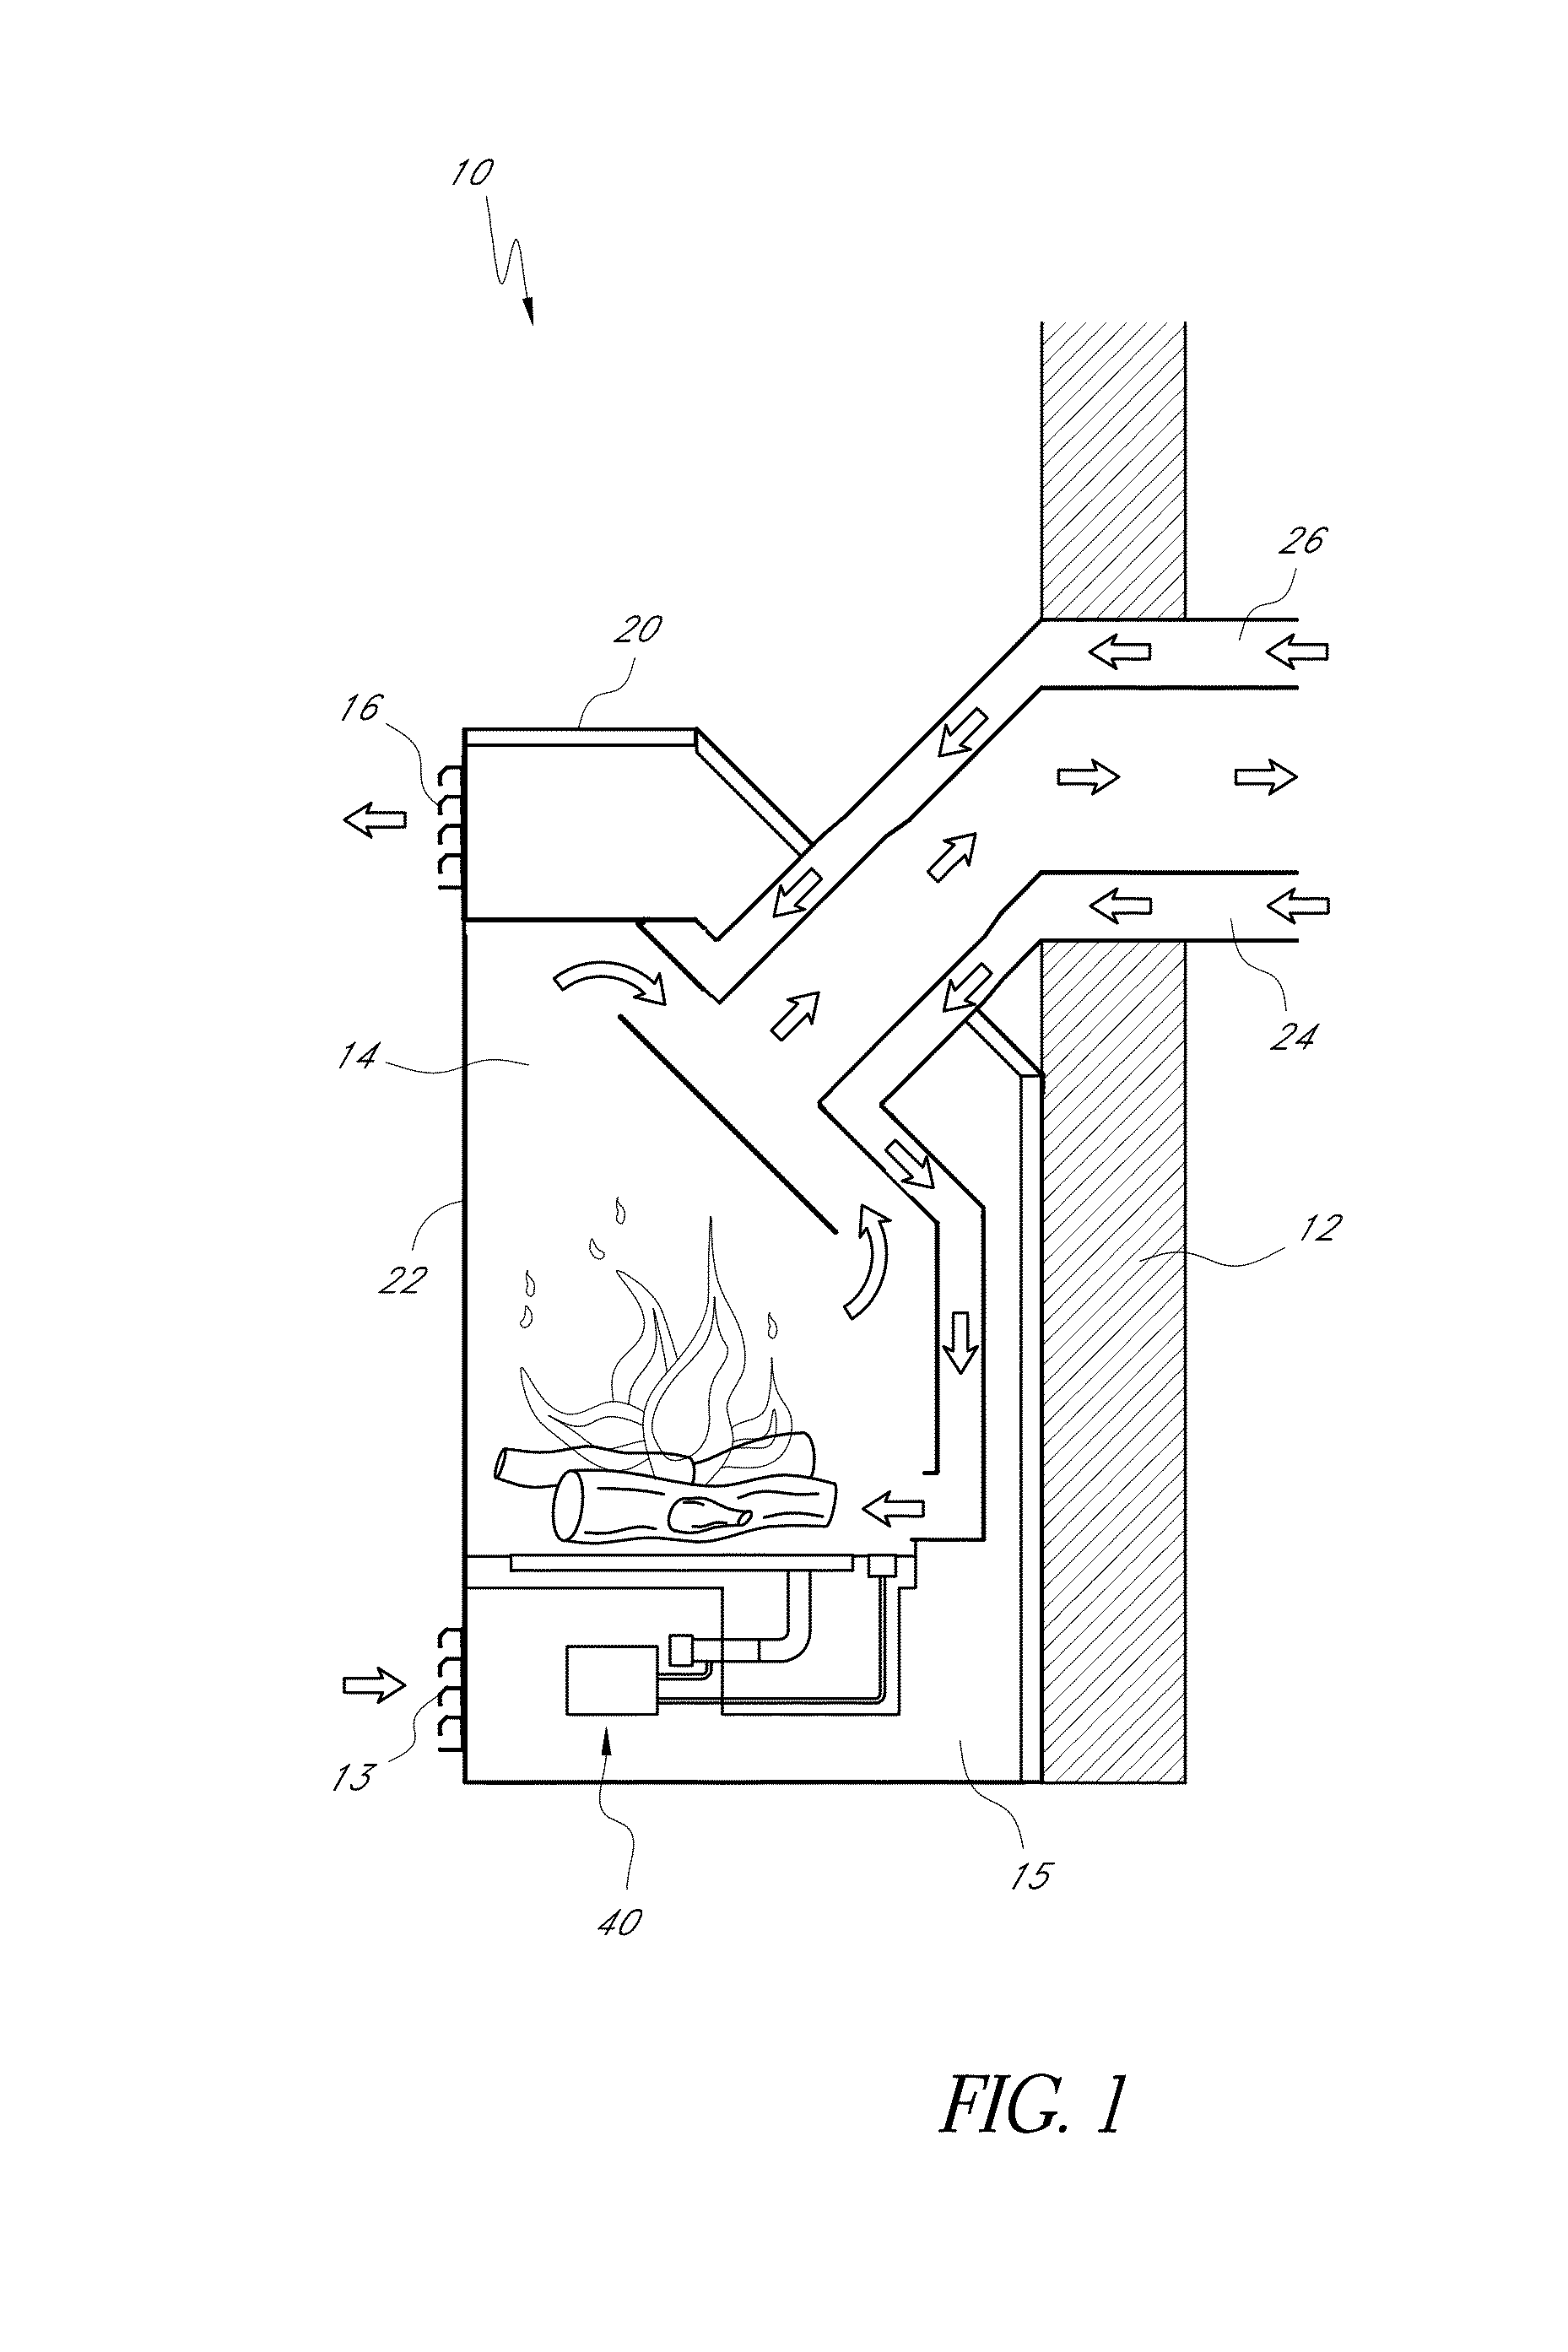 Heating apparatus with fan